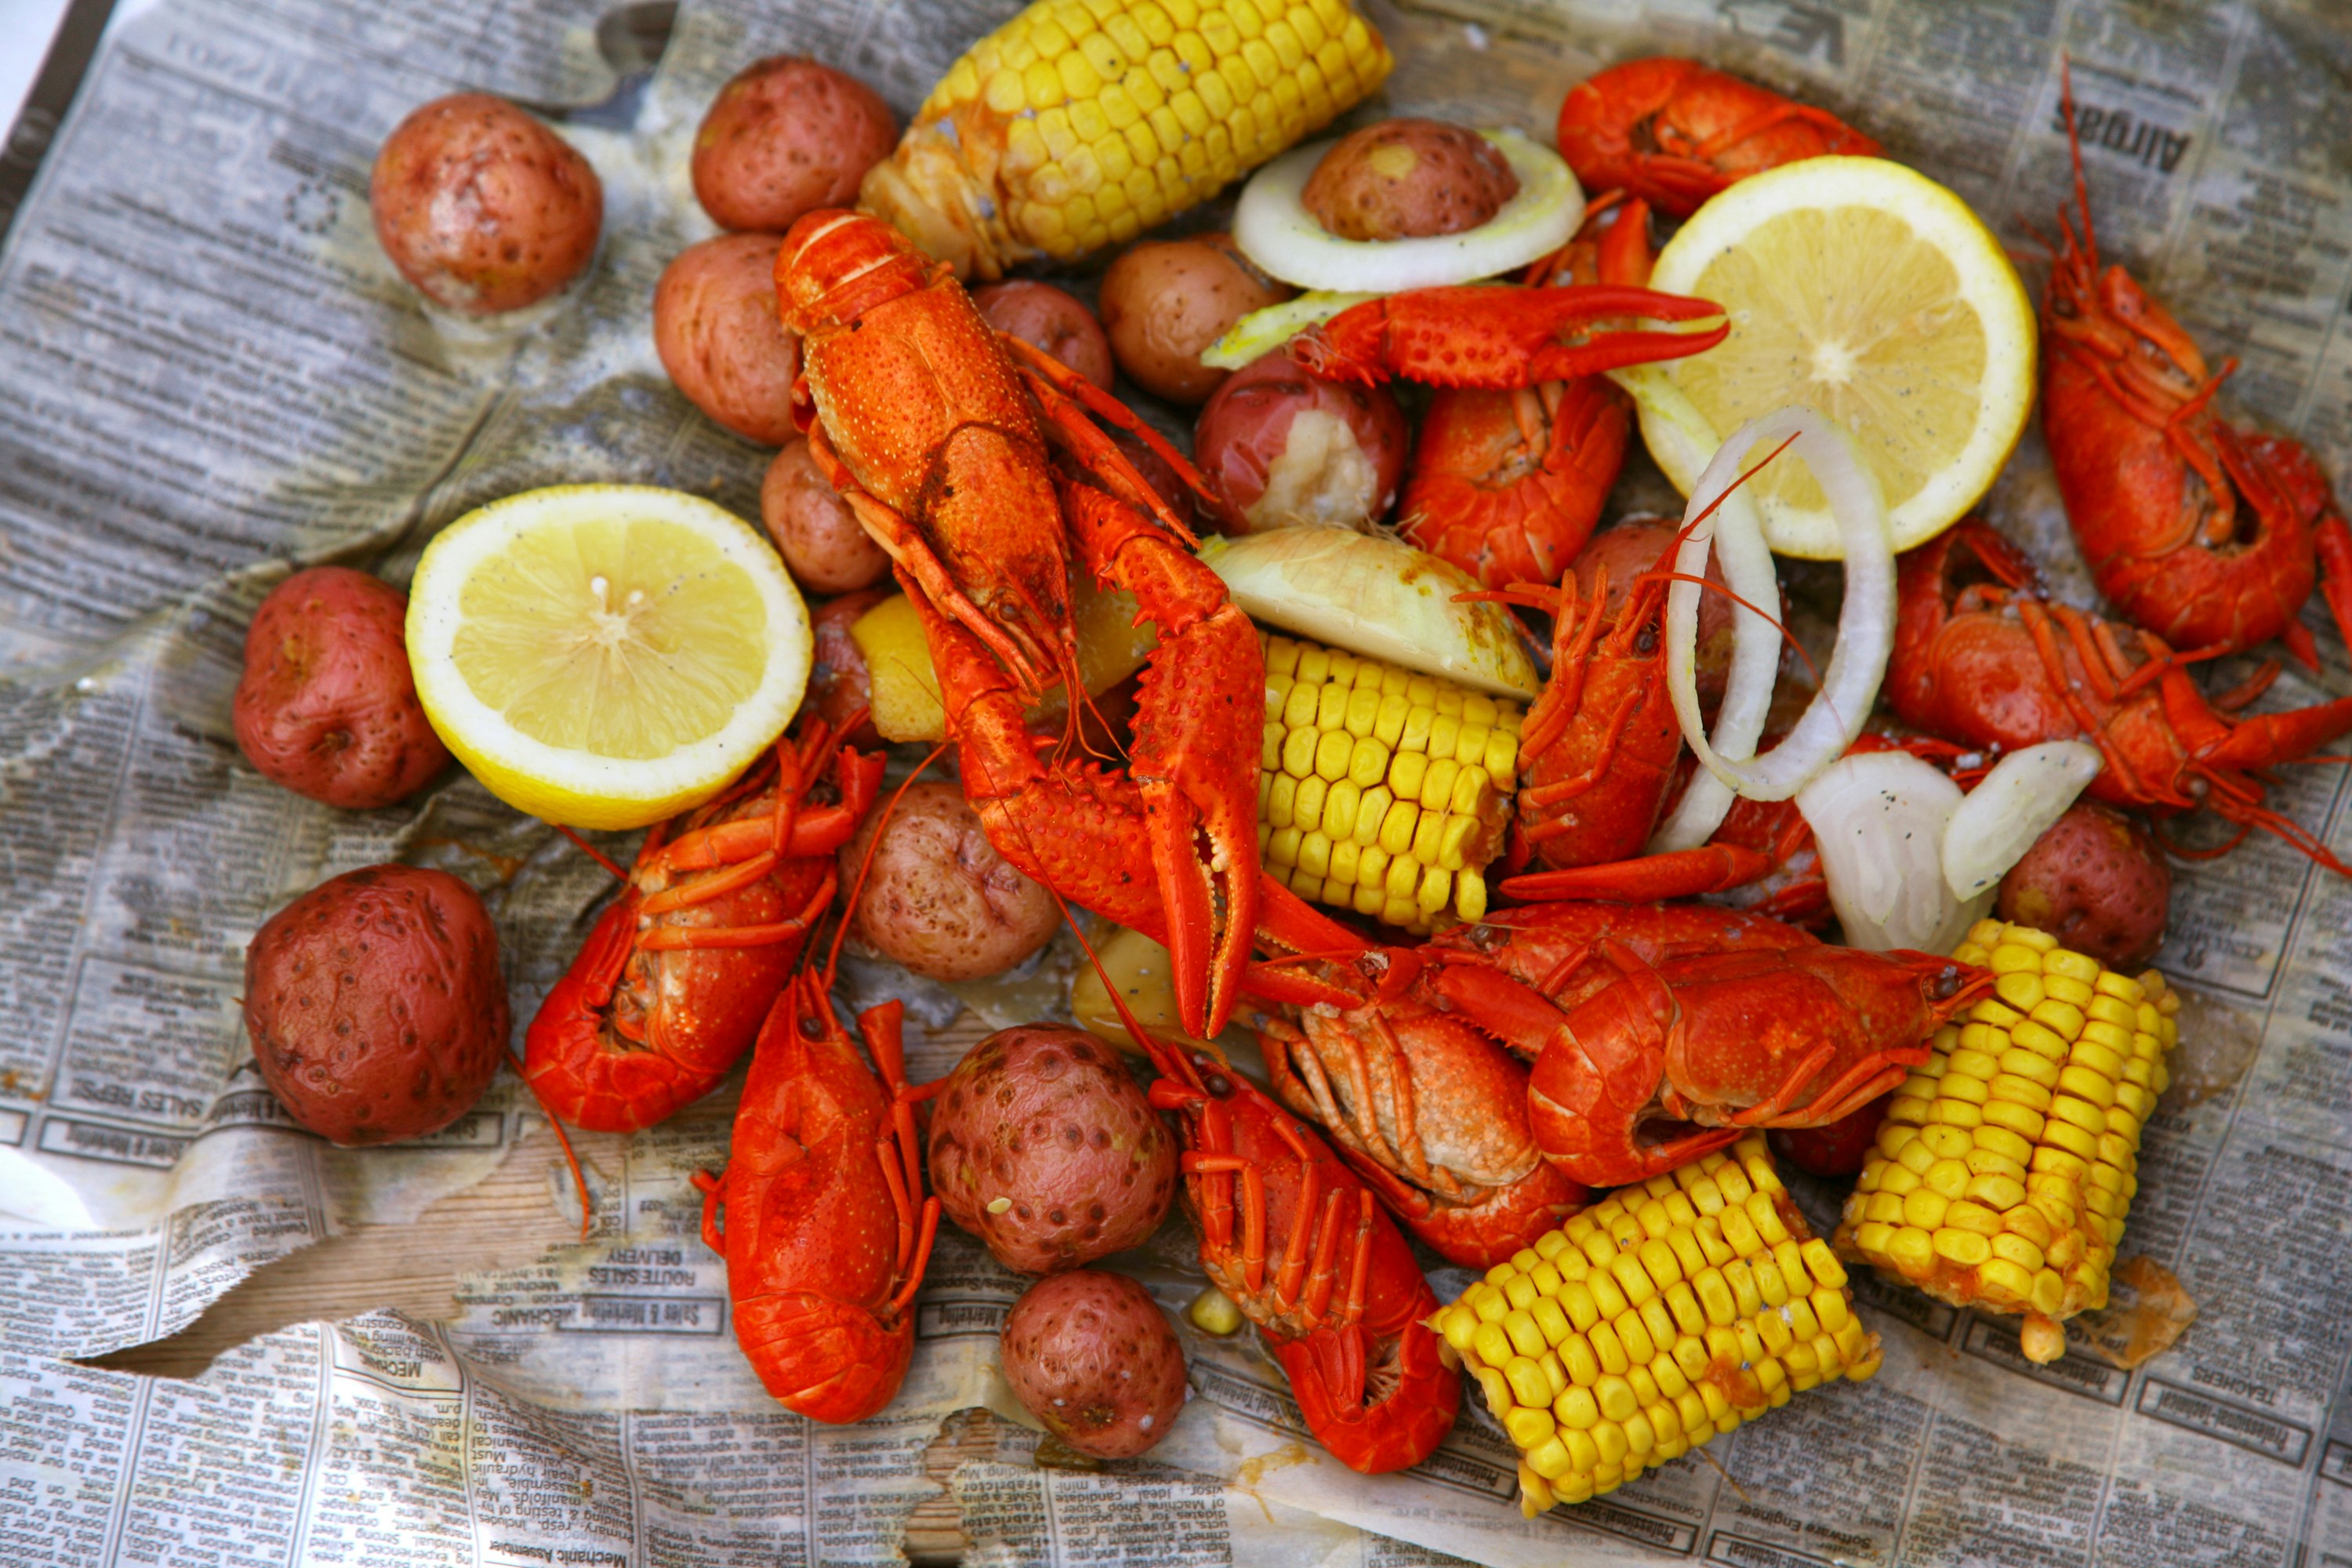 A pile of crawfish, potatoes, corn on the cob with a side of onions and a lemon wedge lay on old newspaper.